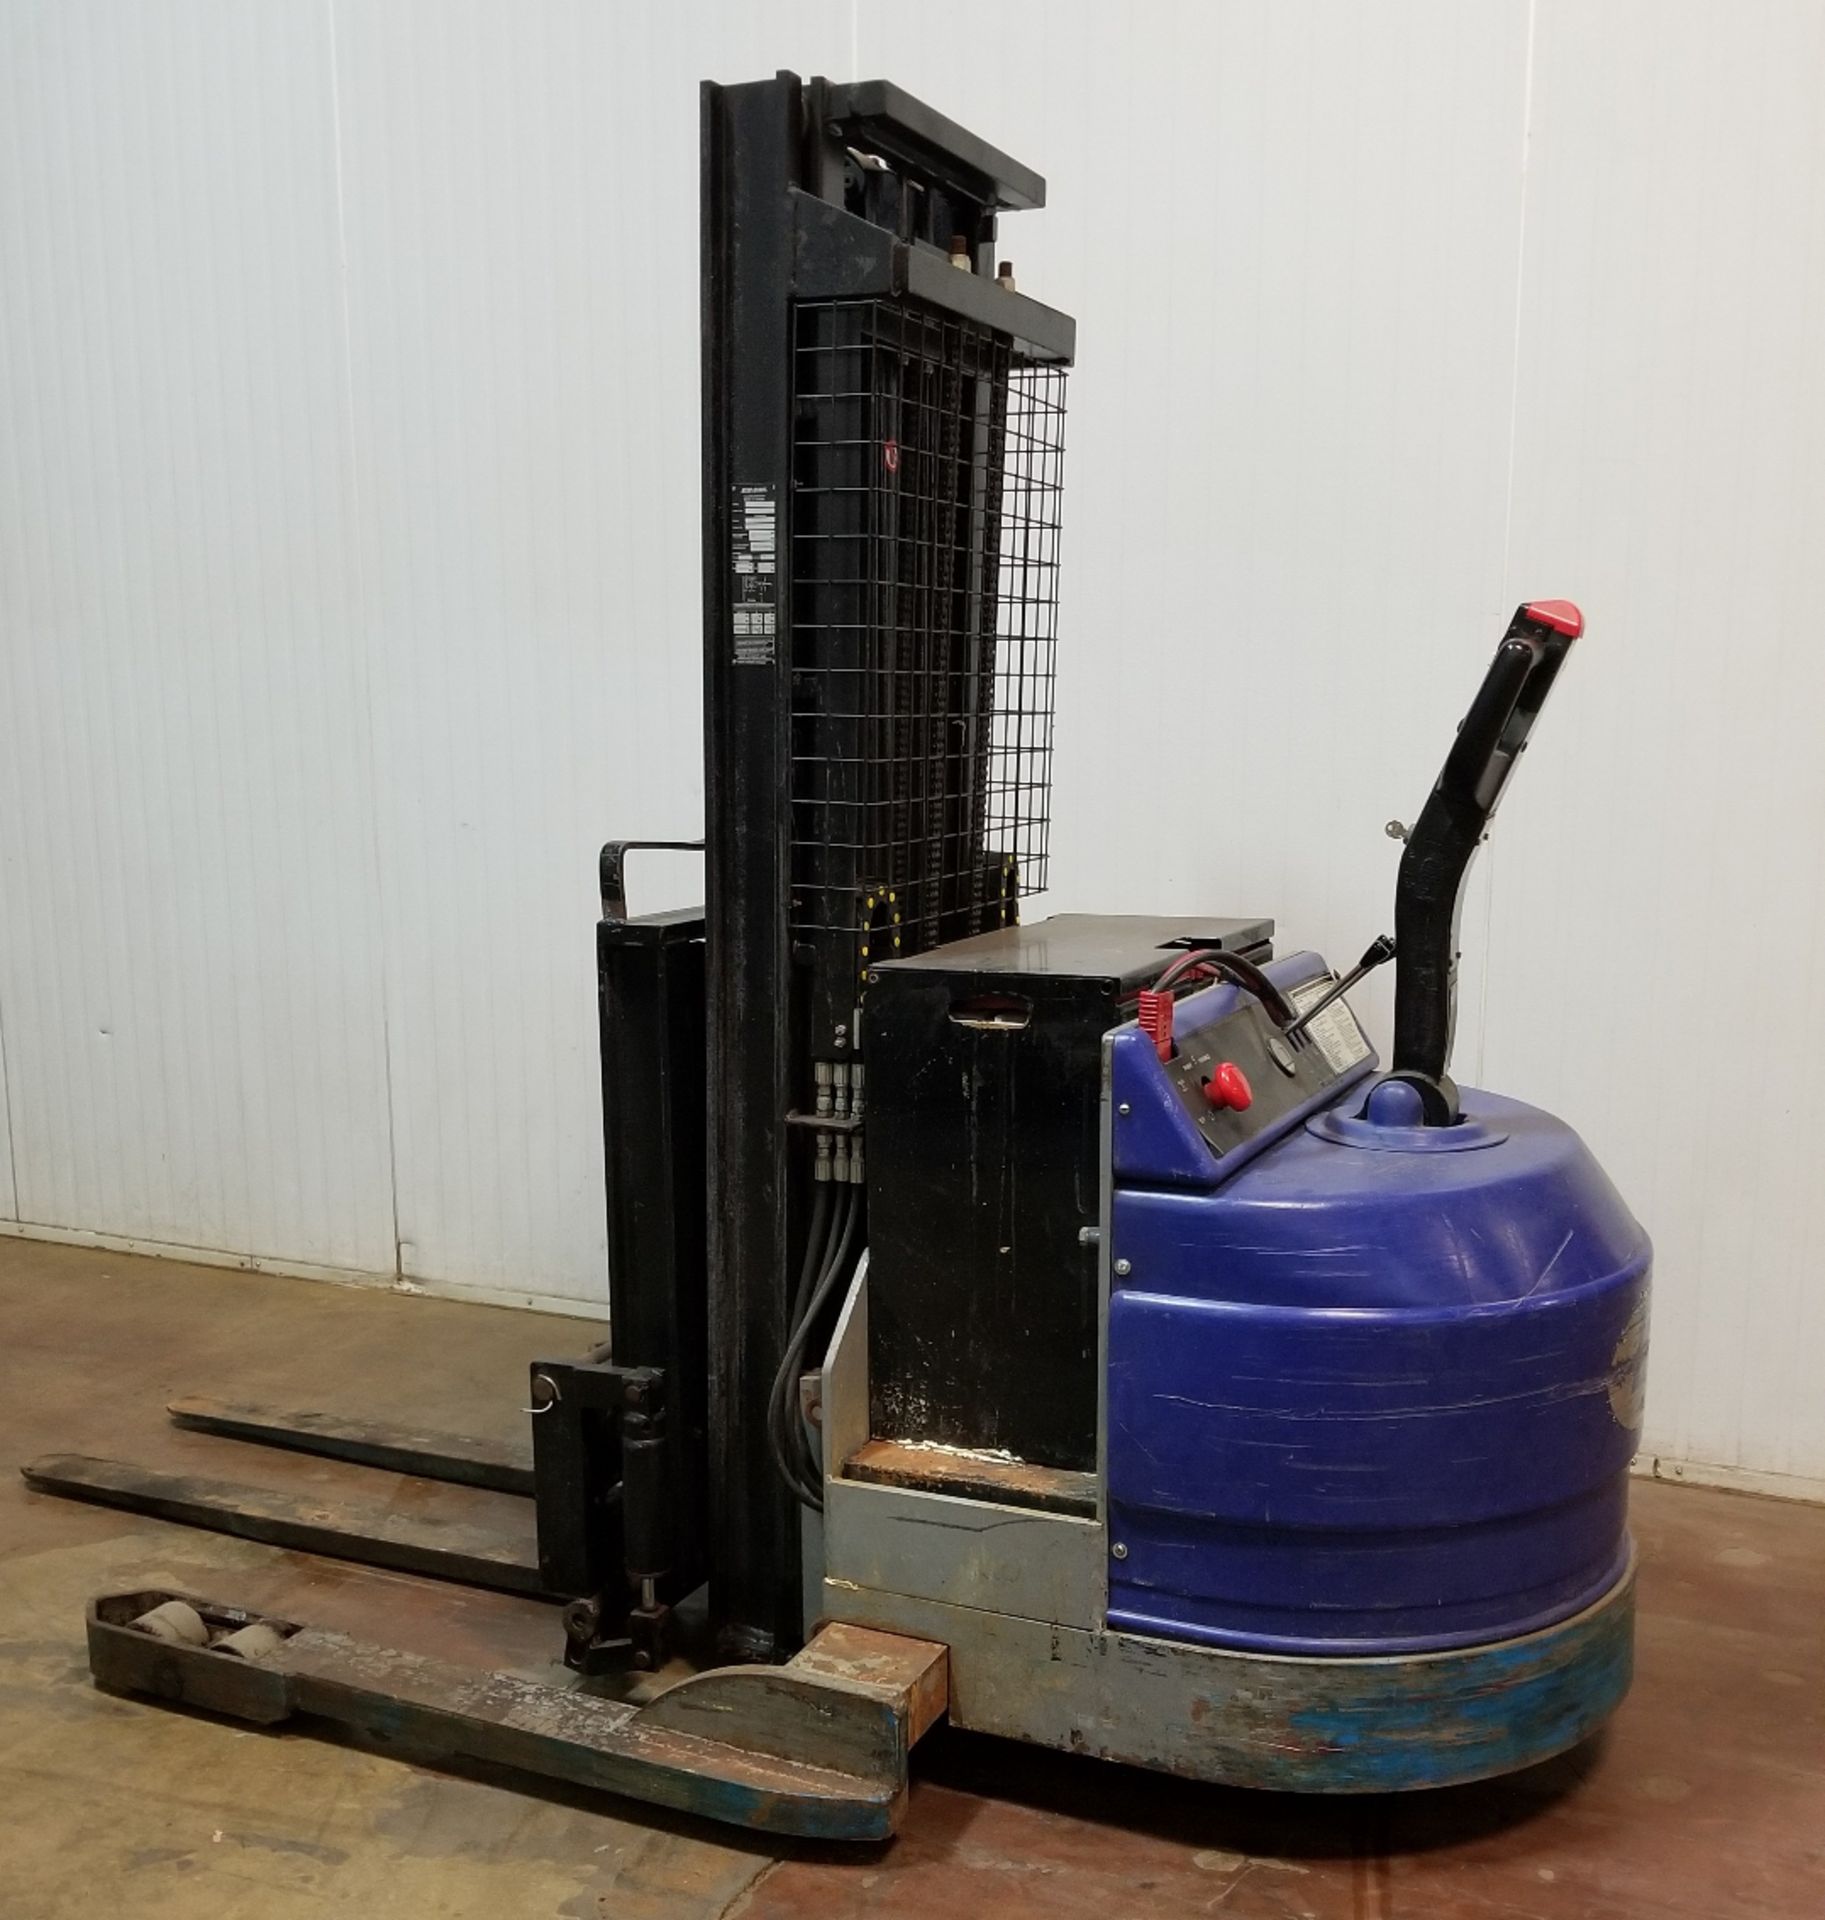 BLUE GIANT (2001) BGNR30-160 3000 LB. CAPACITY 24V WALK-BEHIND ELECTRIC PALLET STACKER WITH 160"